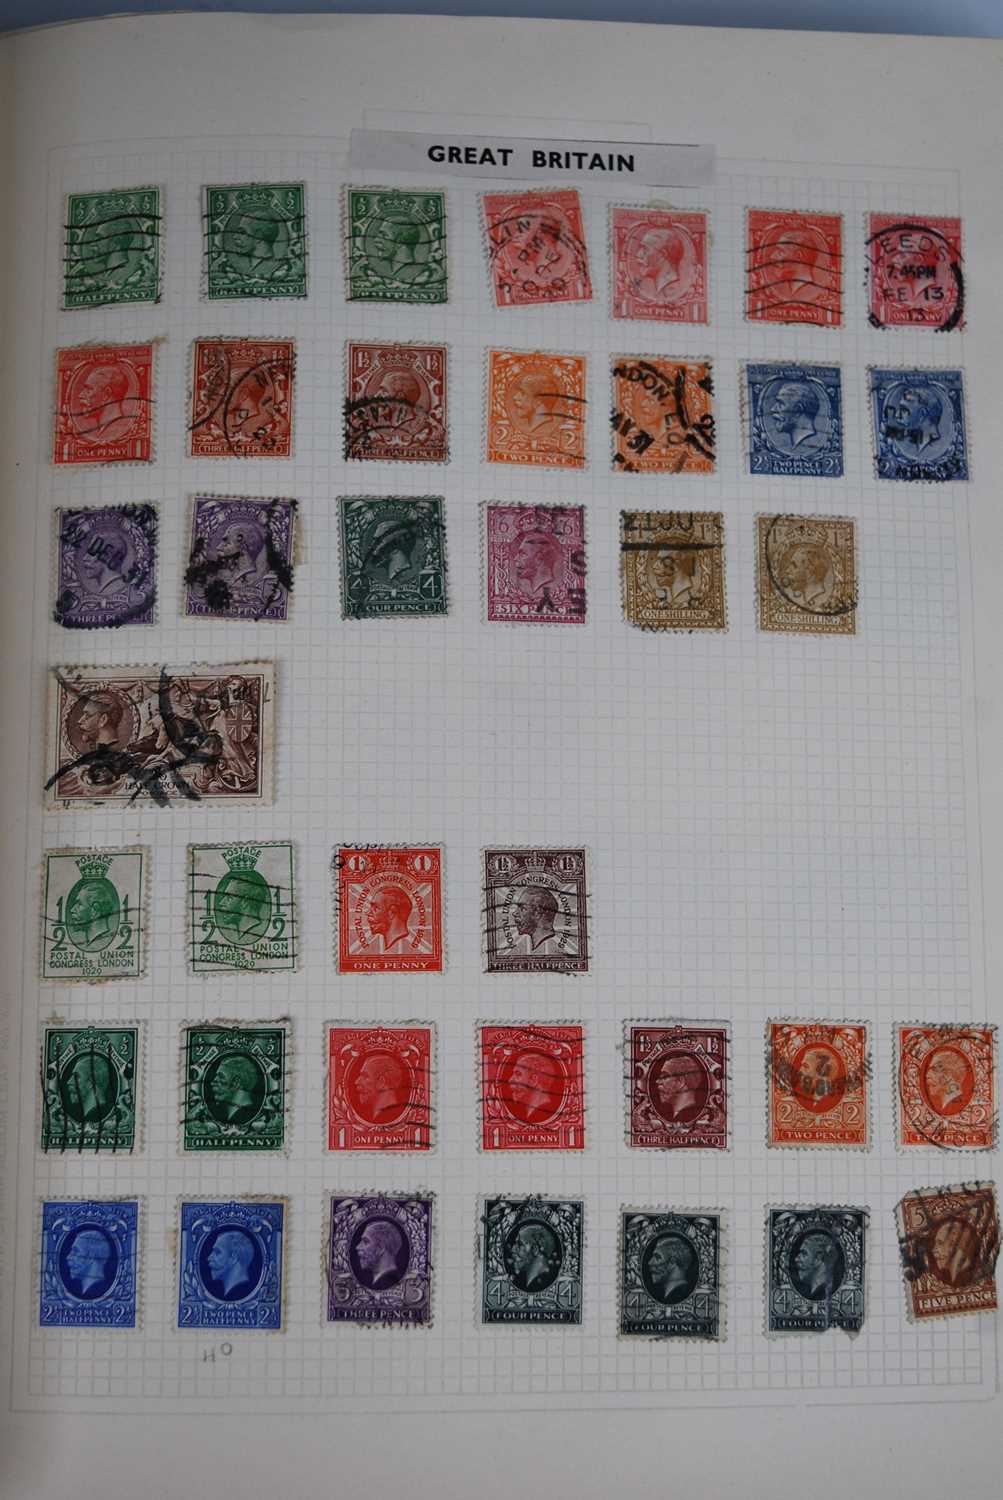 An album of stamps, contents to include GB 1d reds, 1d lilacs, 1935 silver jubilee 1/2d - 2 1/2d - Image 2 of 5